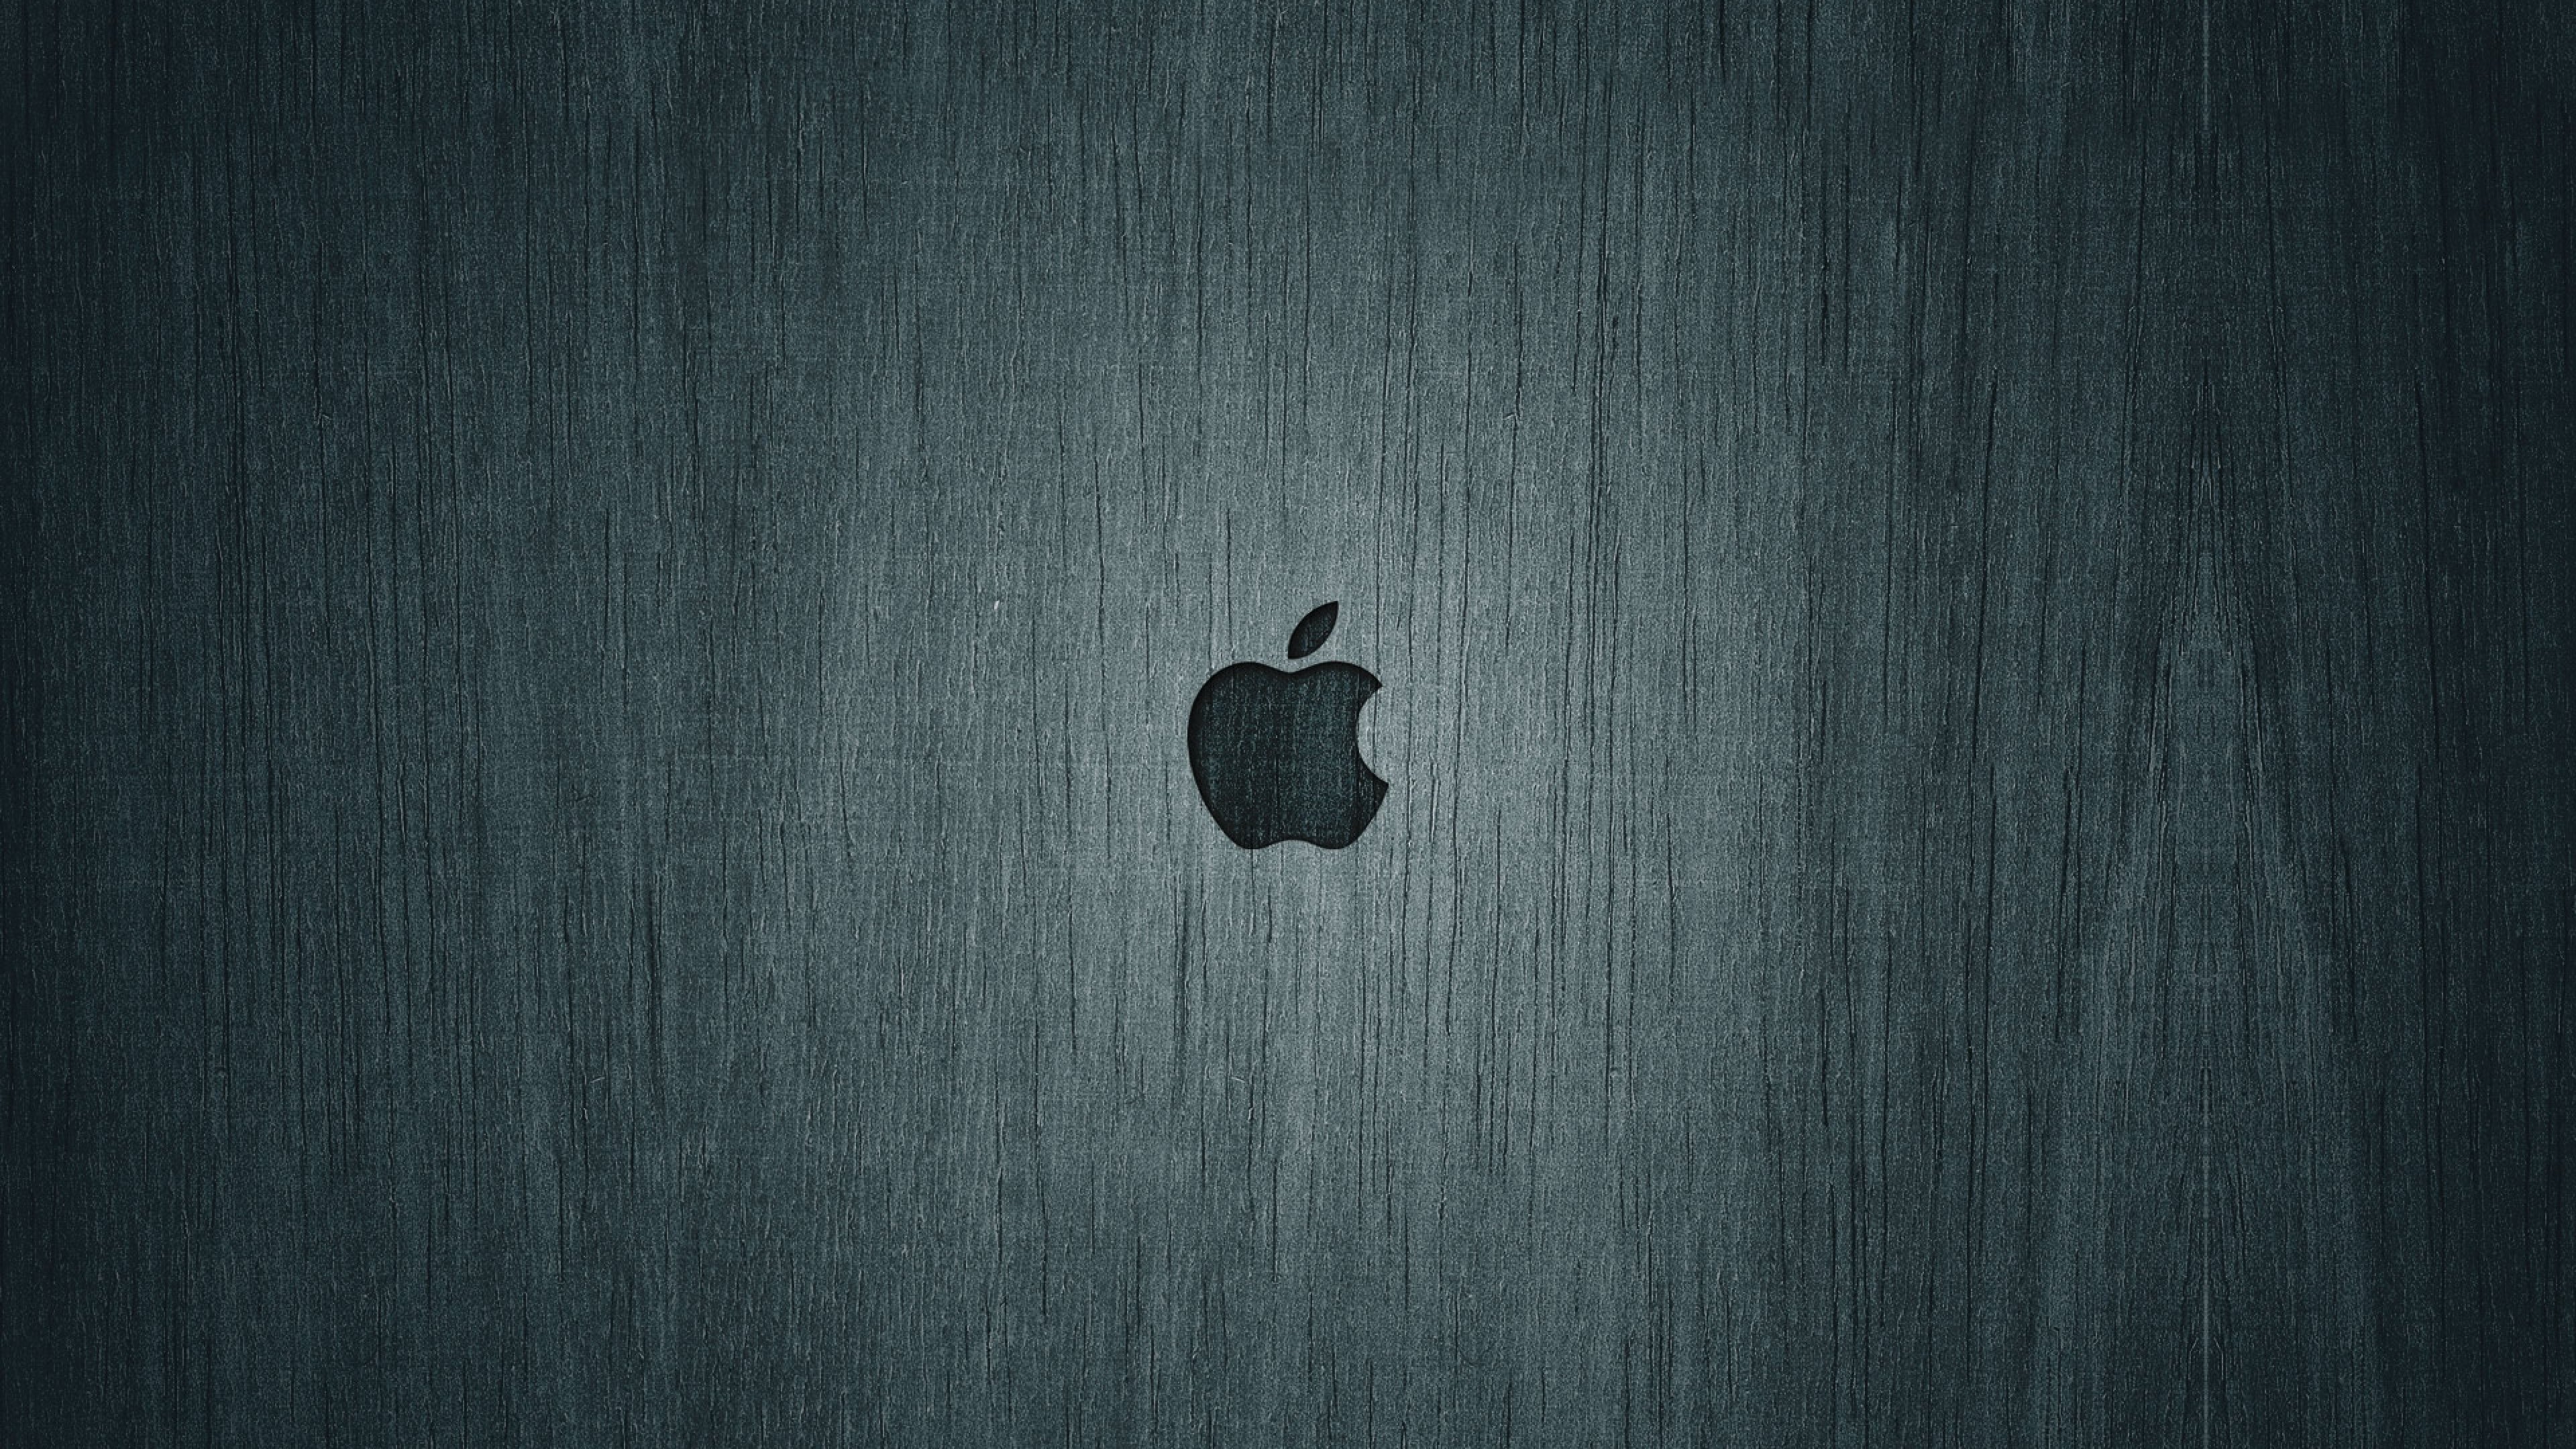 Wallpaper Apple, Apple MacBook Pro, Colorfulness, Pattern, Graphic Design,  Background - Download Free Image